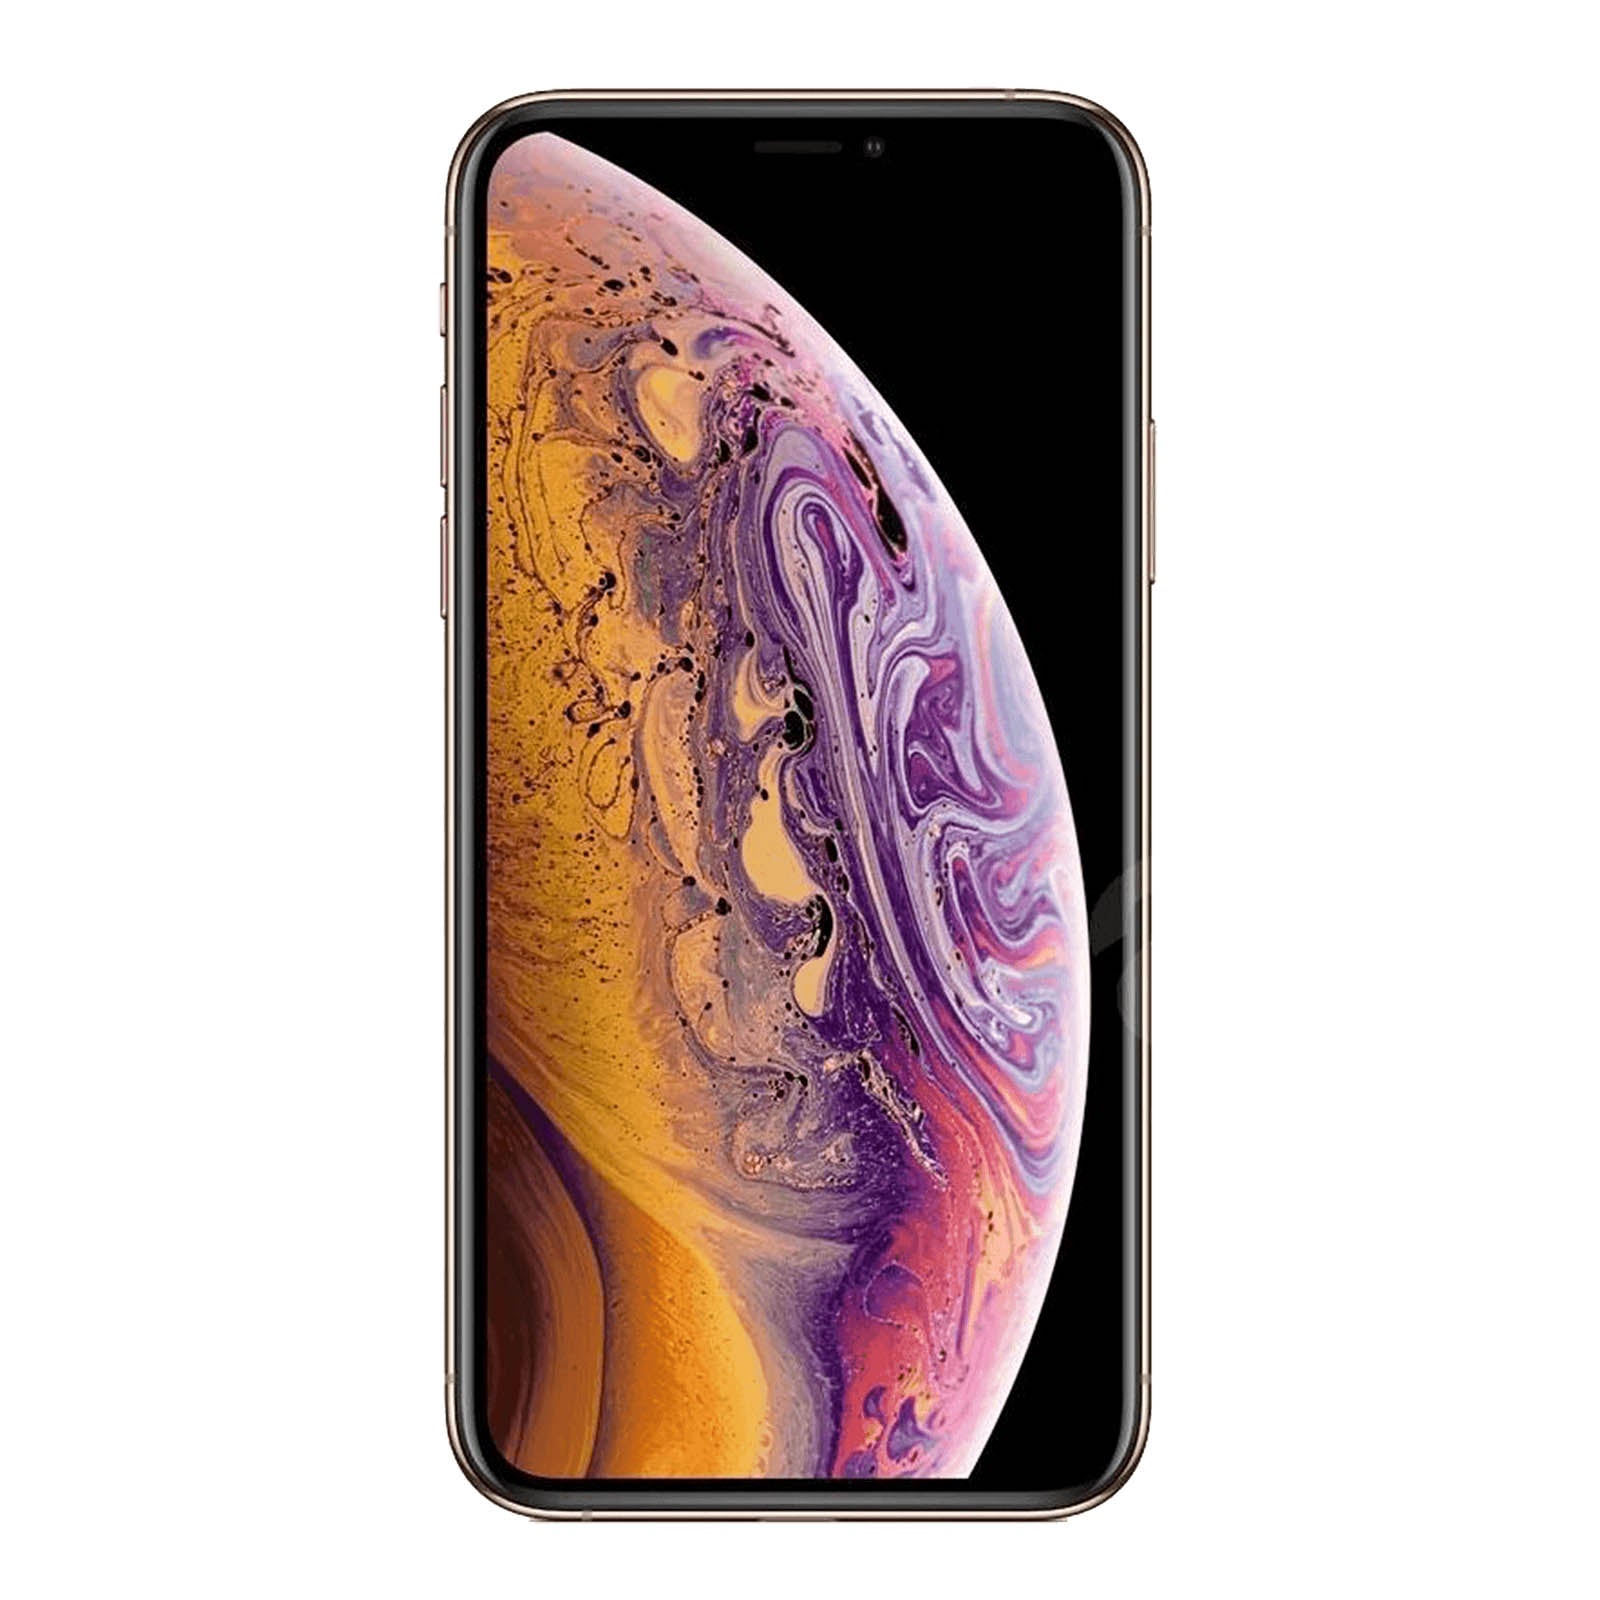 Apple iPhone XS Max 512GB Gold Good - T-Mobile